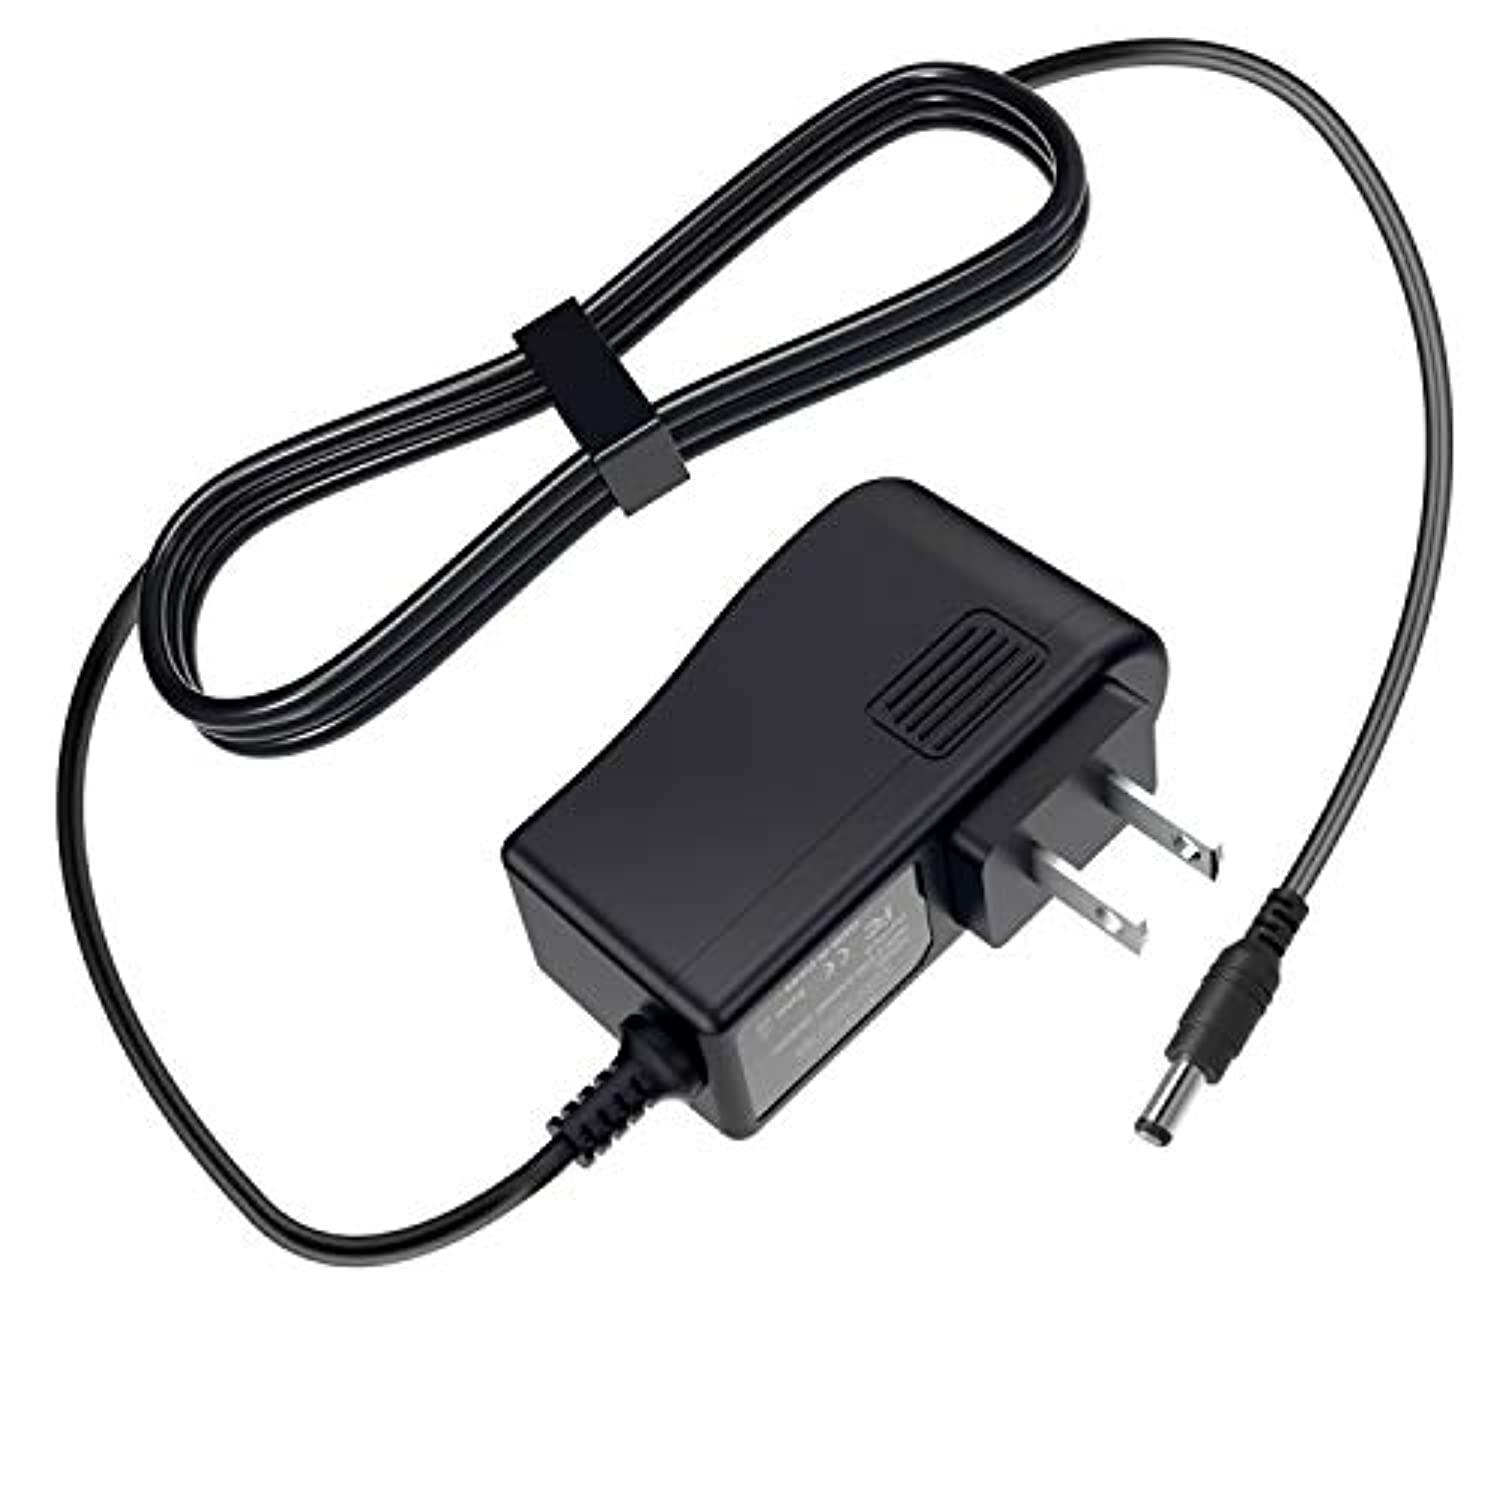 brst 24v ac/dc adapter replacement for polycom cx600 hd 2200-15987-025 voip ms lync ip phone 1465-43019-001 146543019001 soun